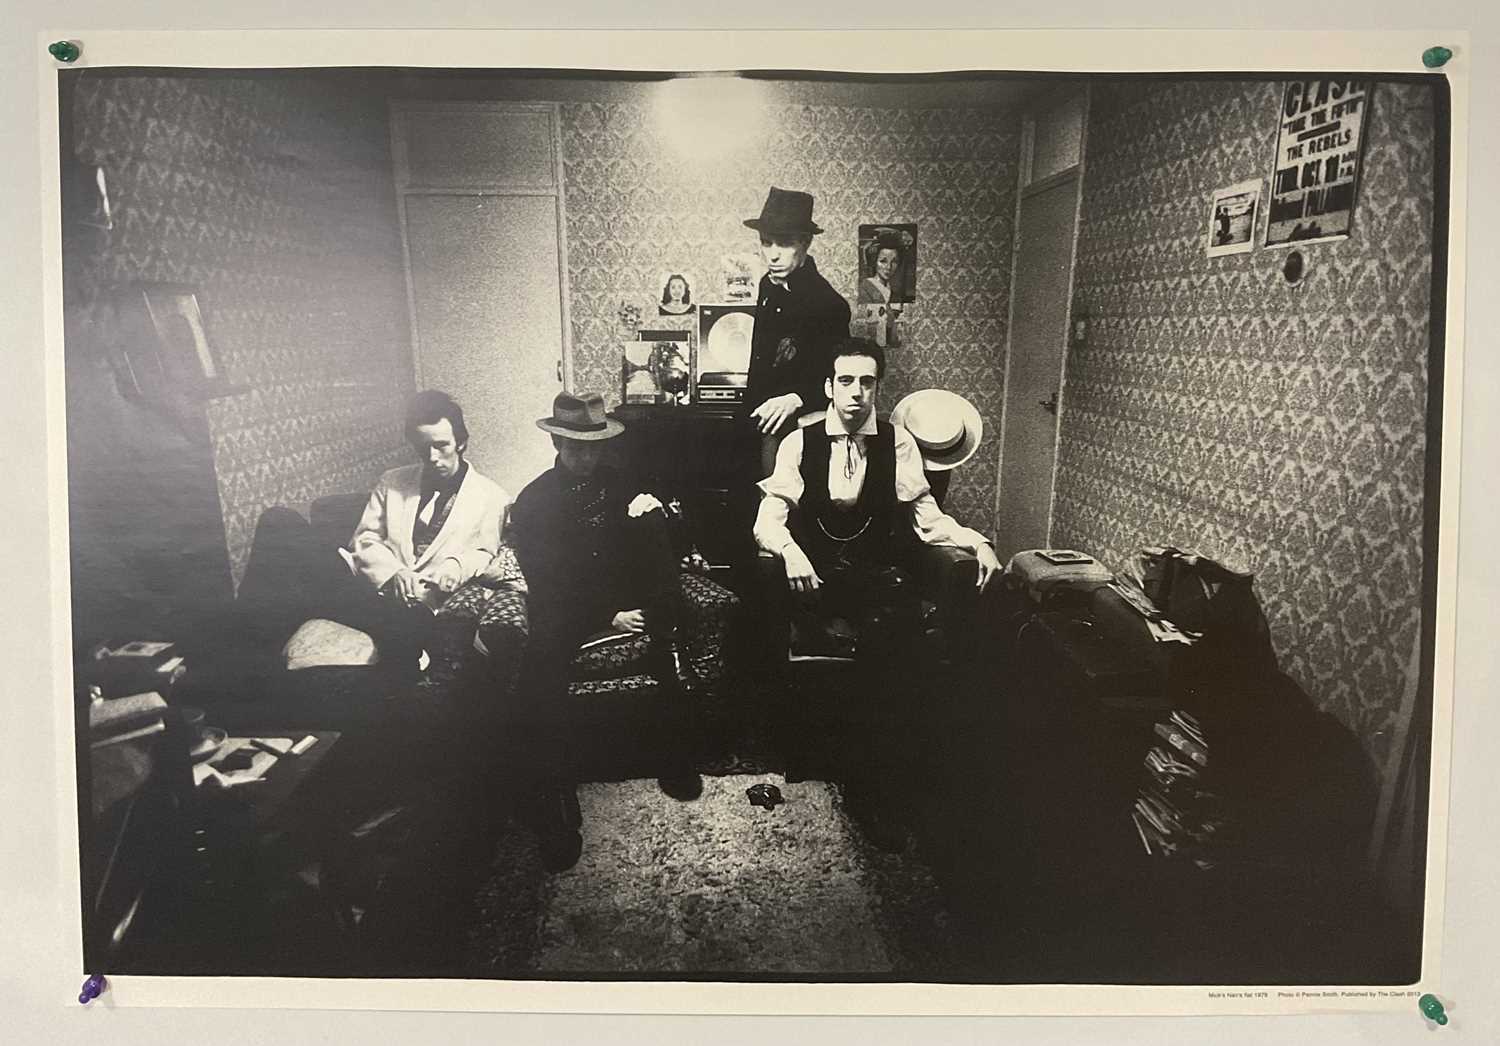 THE CLASH - A group of album artwork commercial posters for The Clash self titled album, Sandinista, - Image 5 of 7